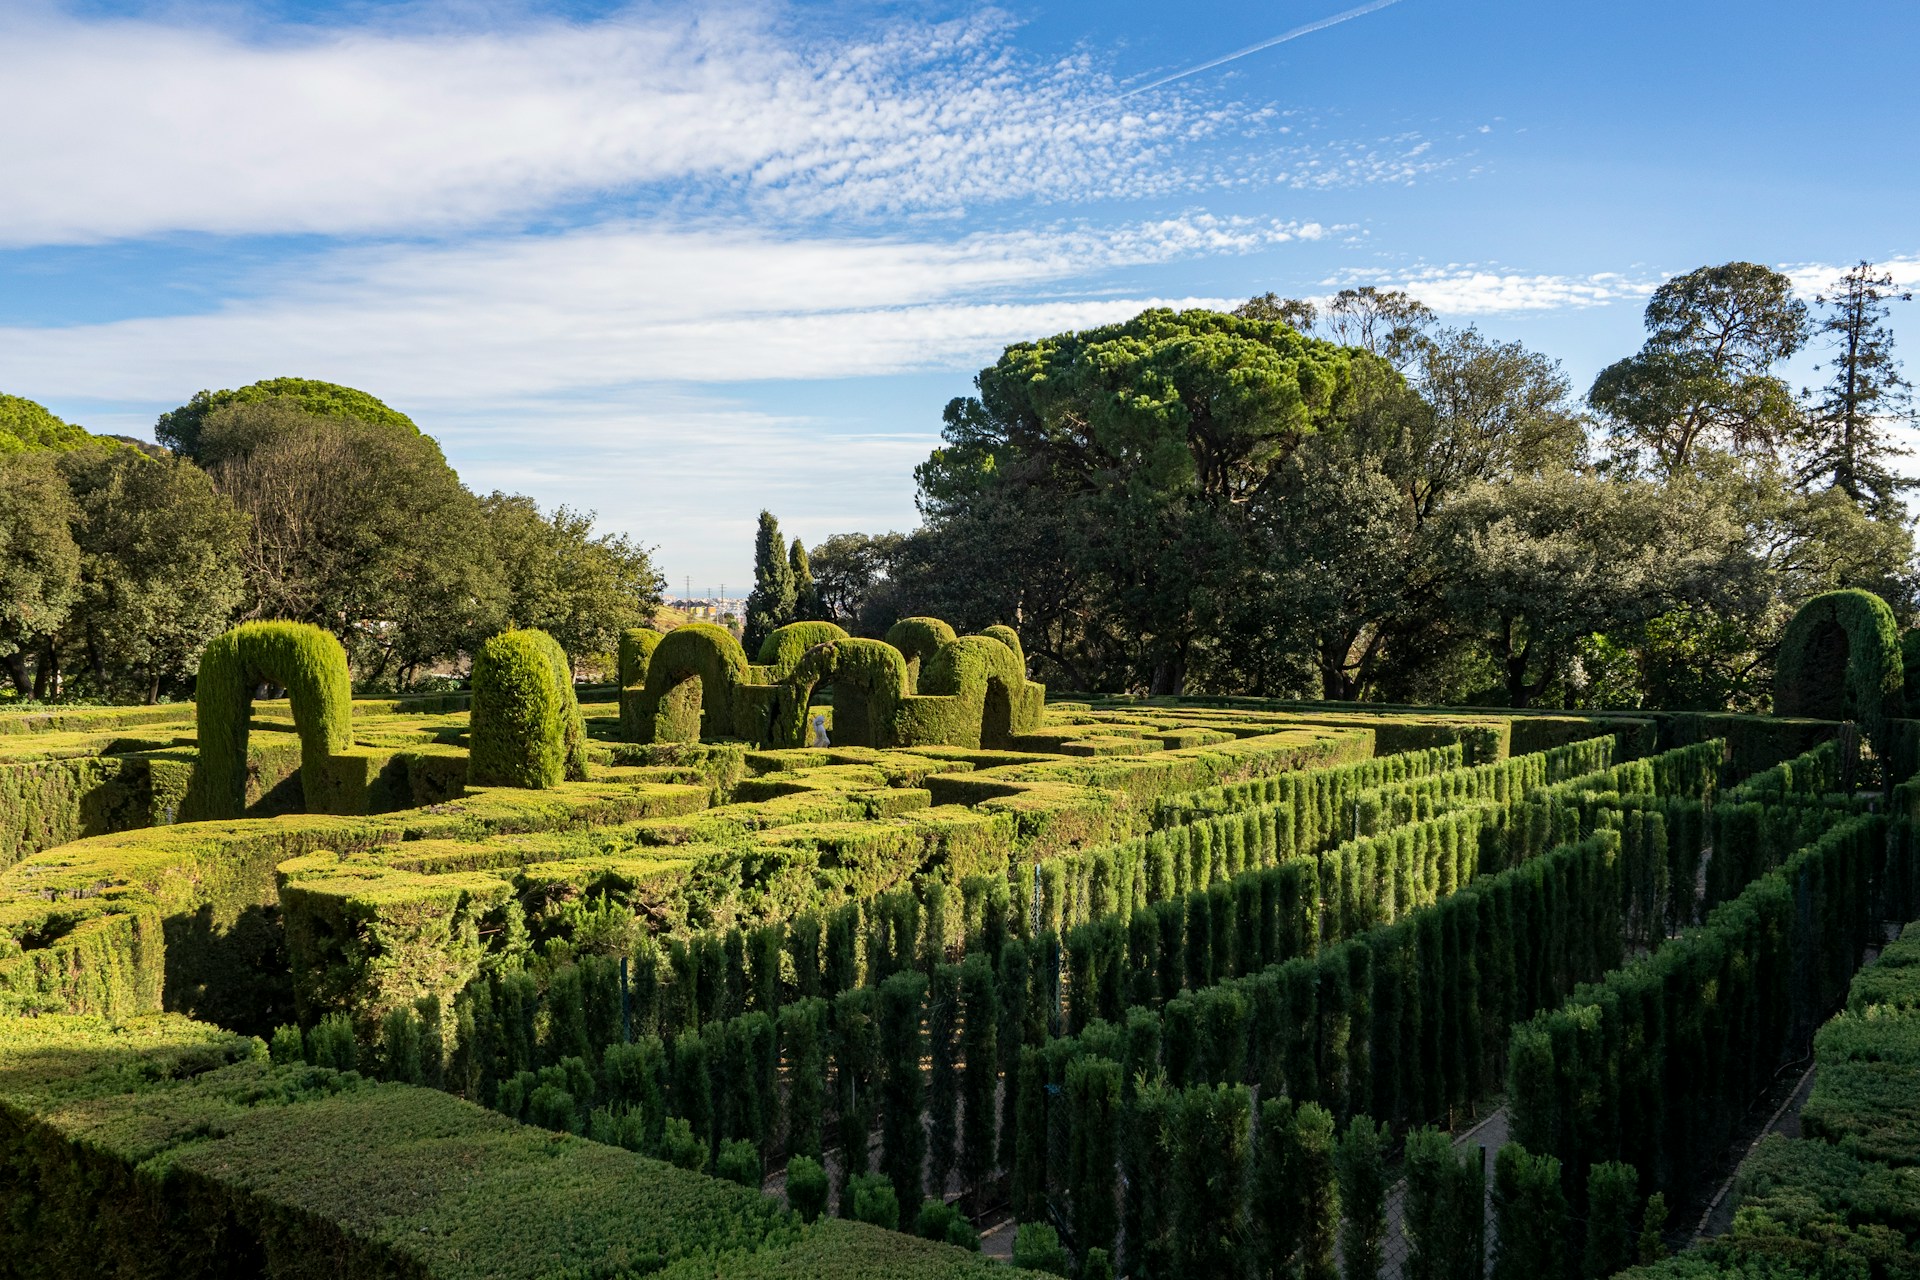 The hedge maze at the heart of Parc del Laberint d'Horta.